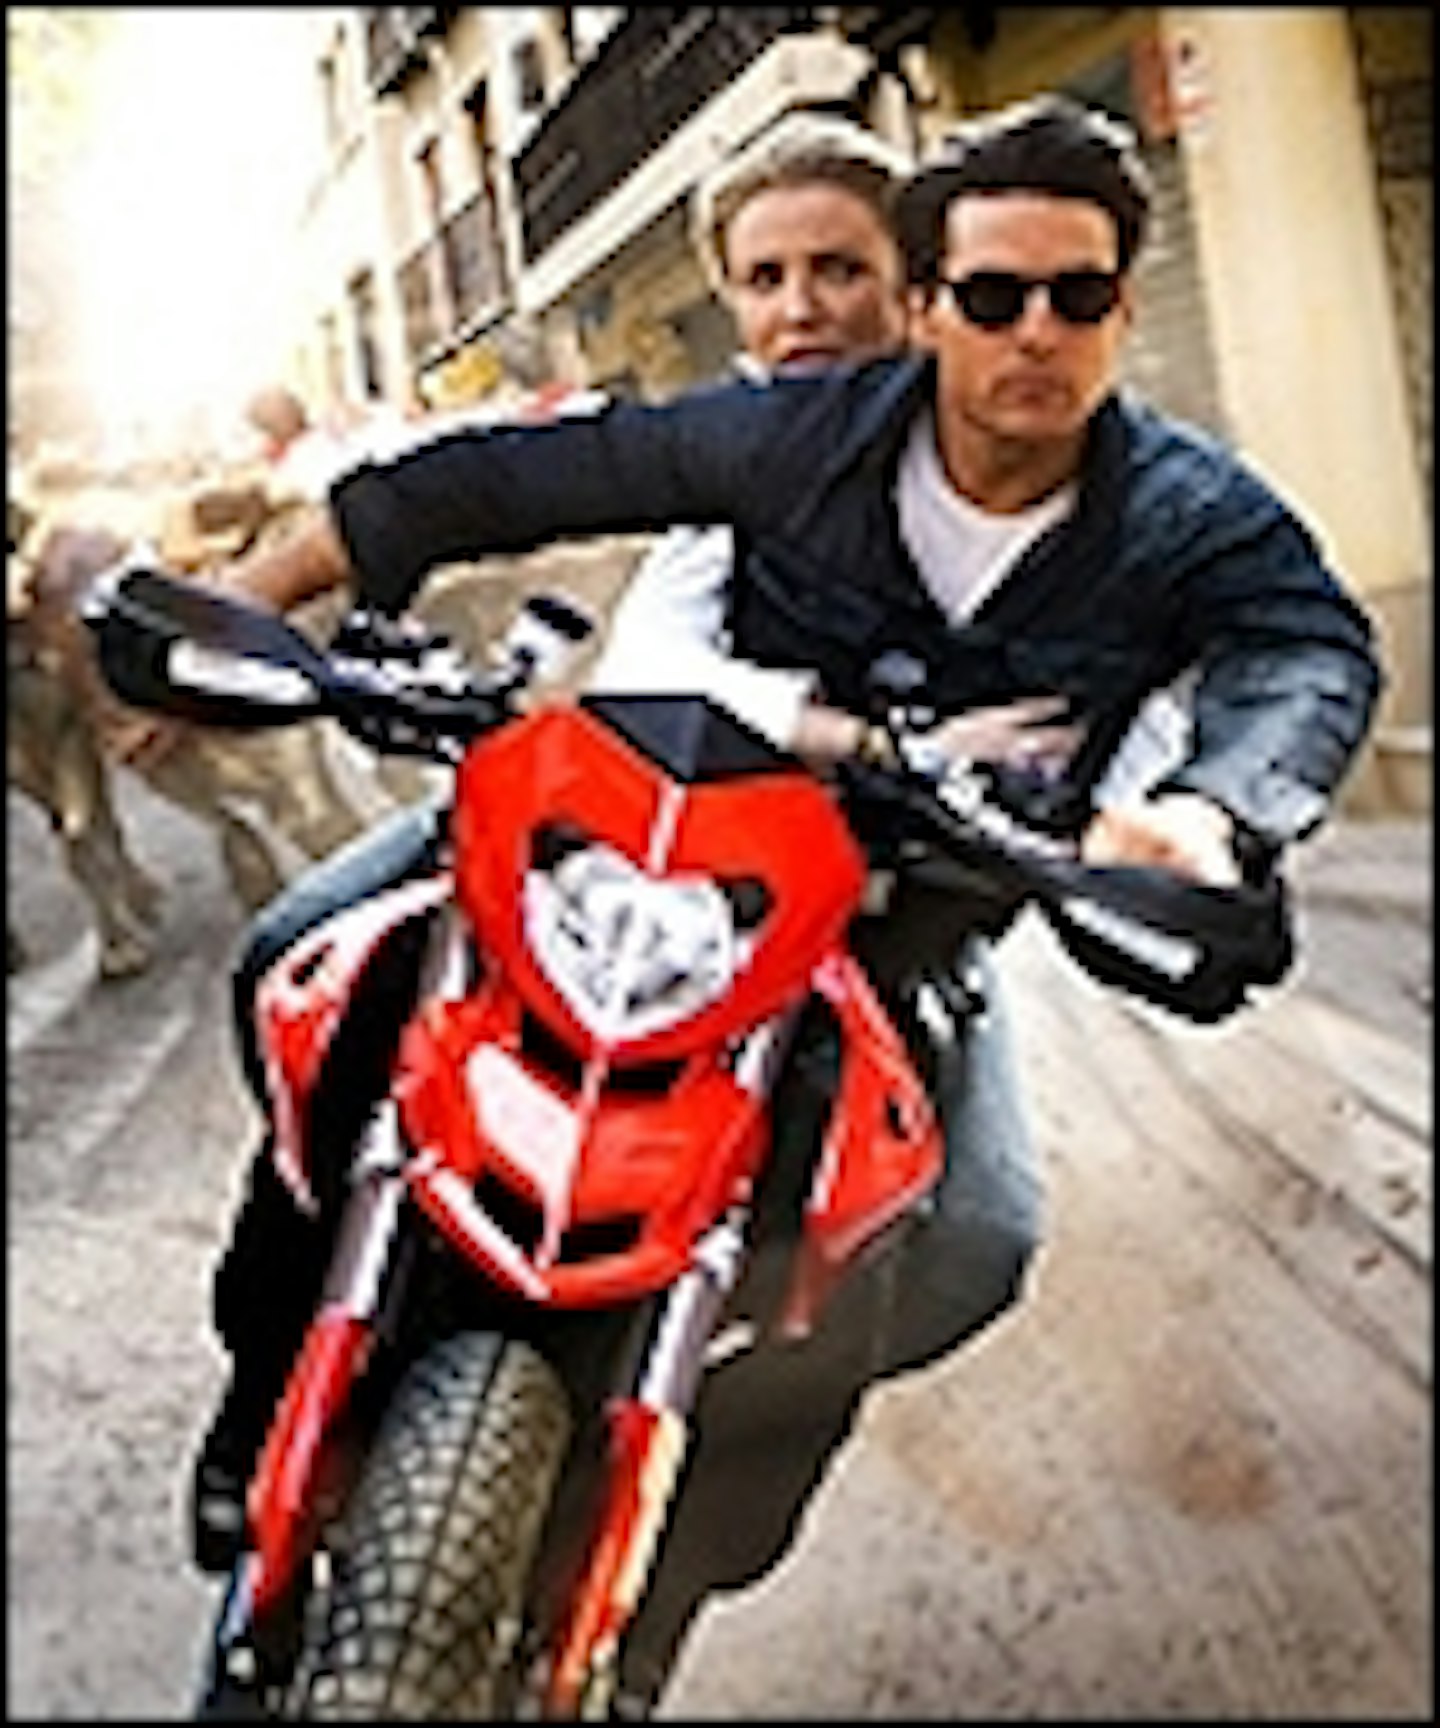 Second Knight & Day Trailer Released